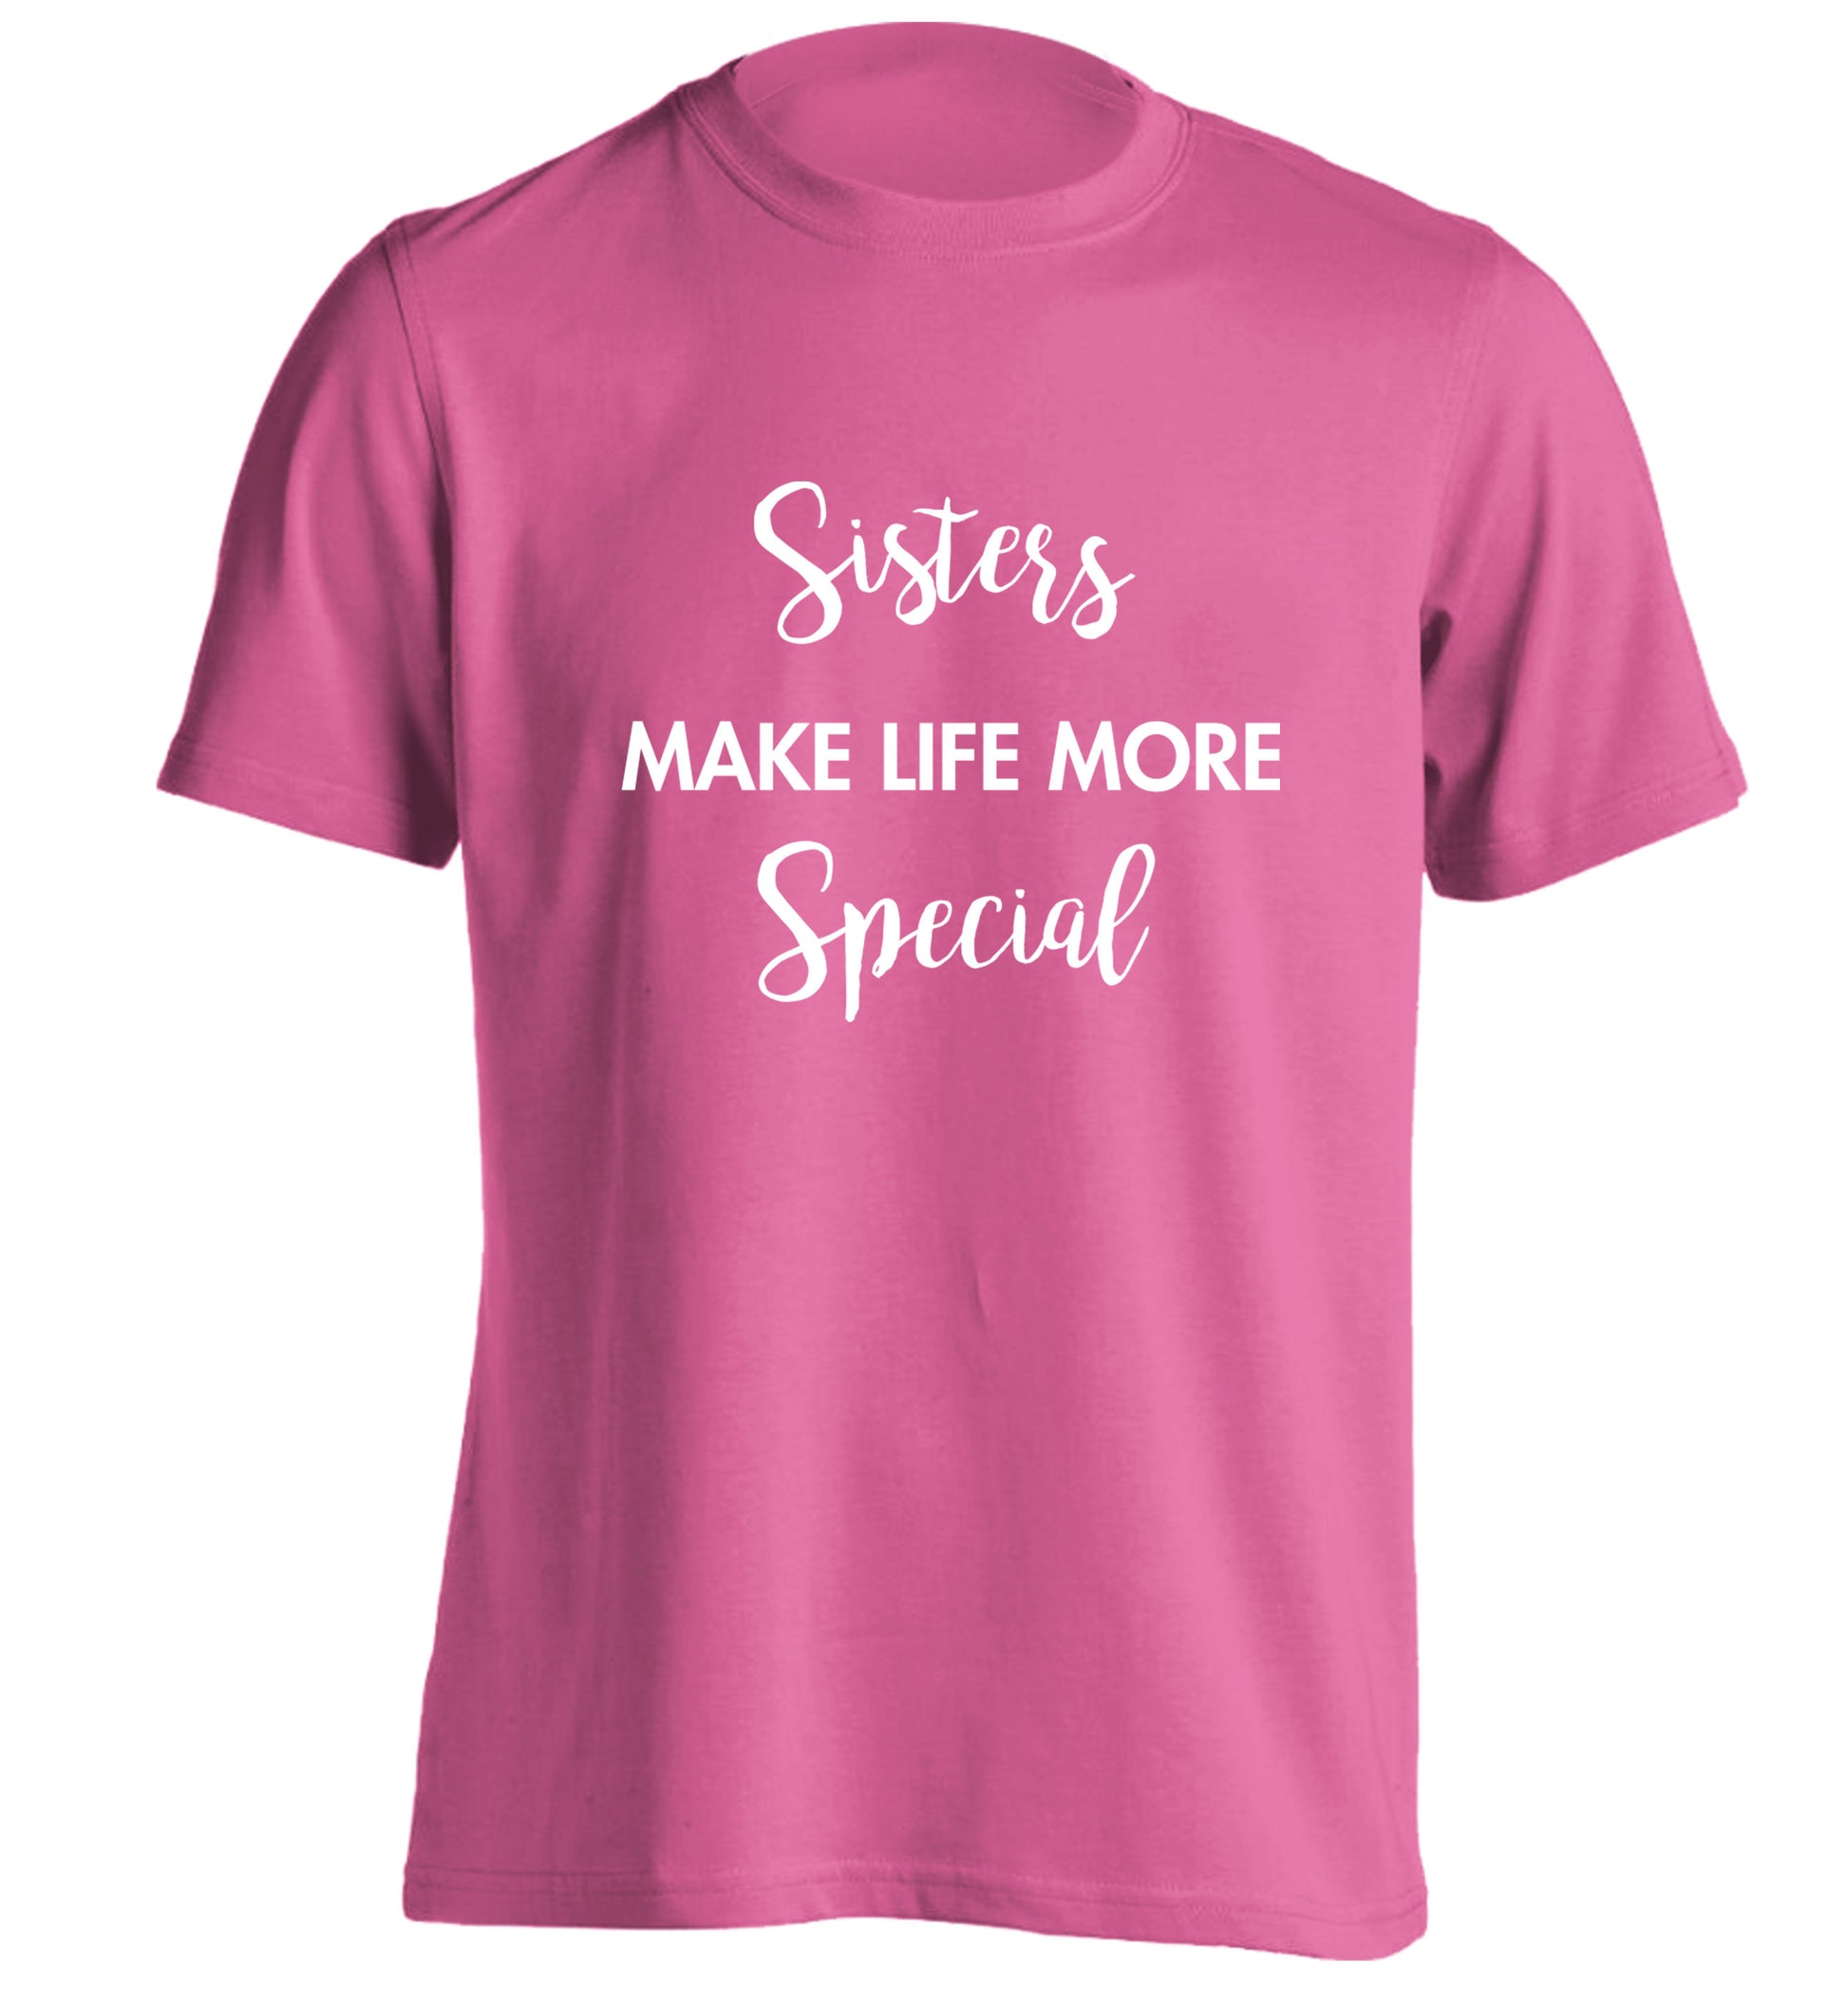 Sisters make life more special adults unisex pink Tshirt 2XL